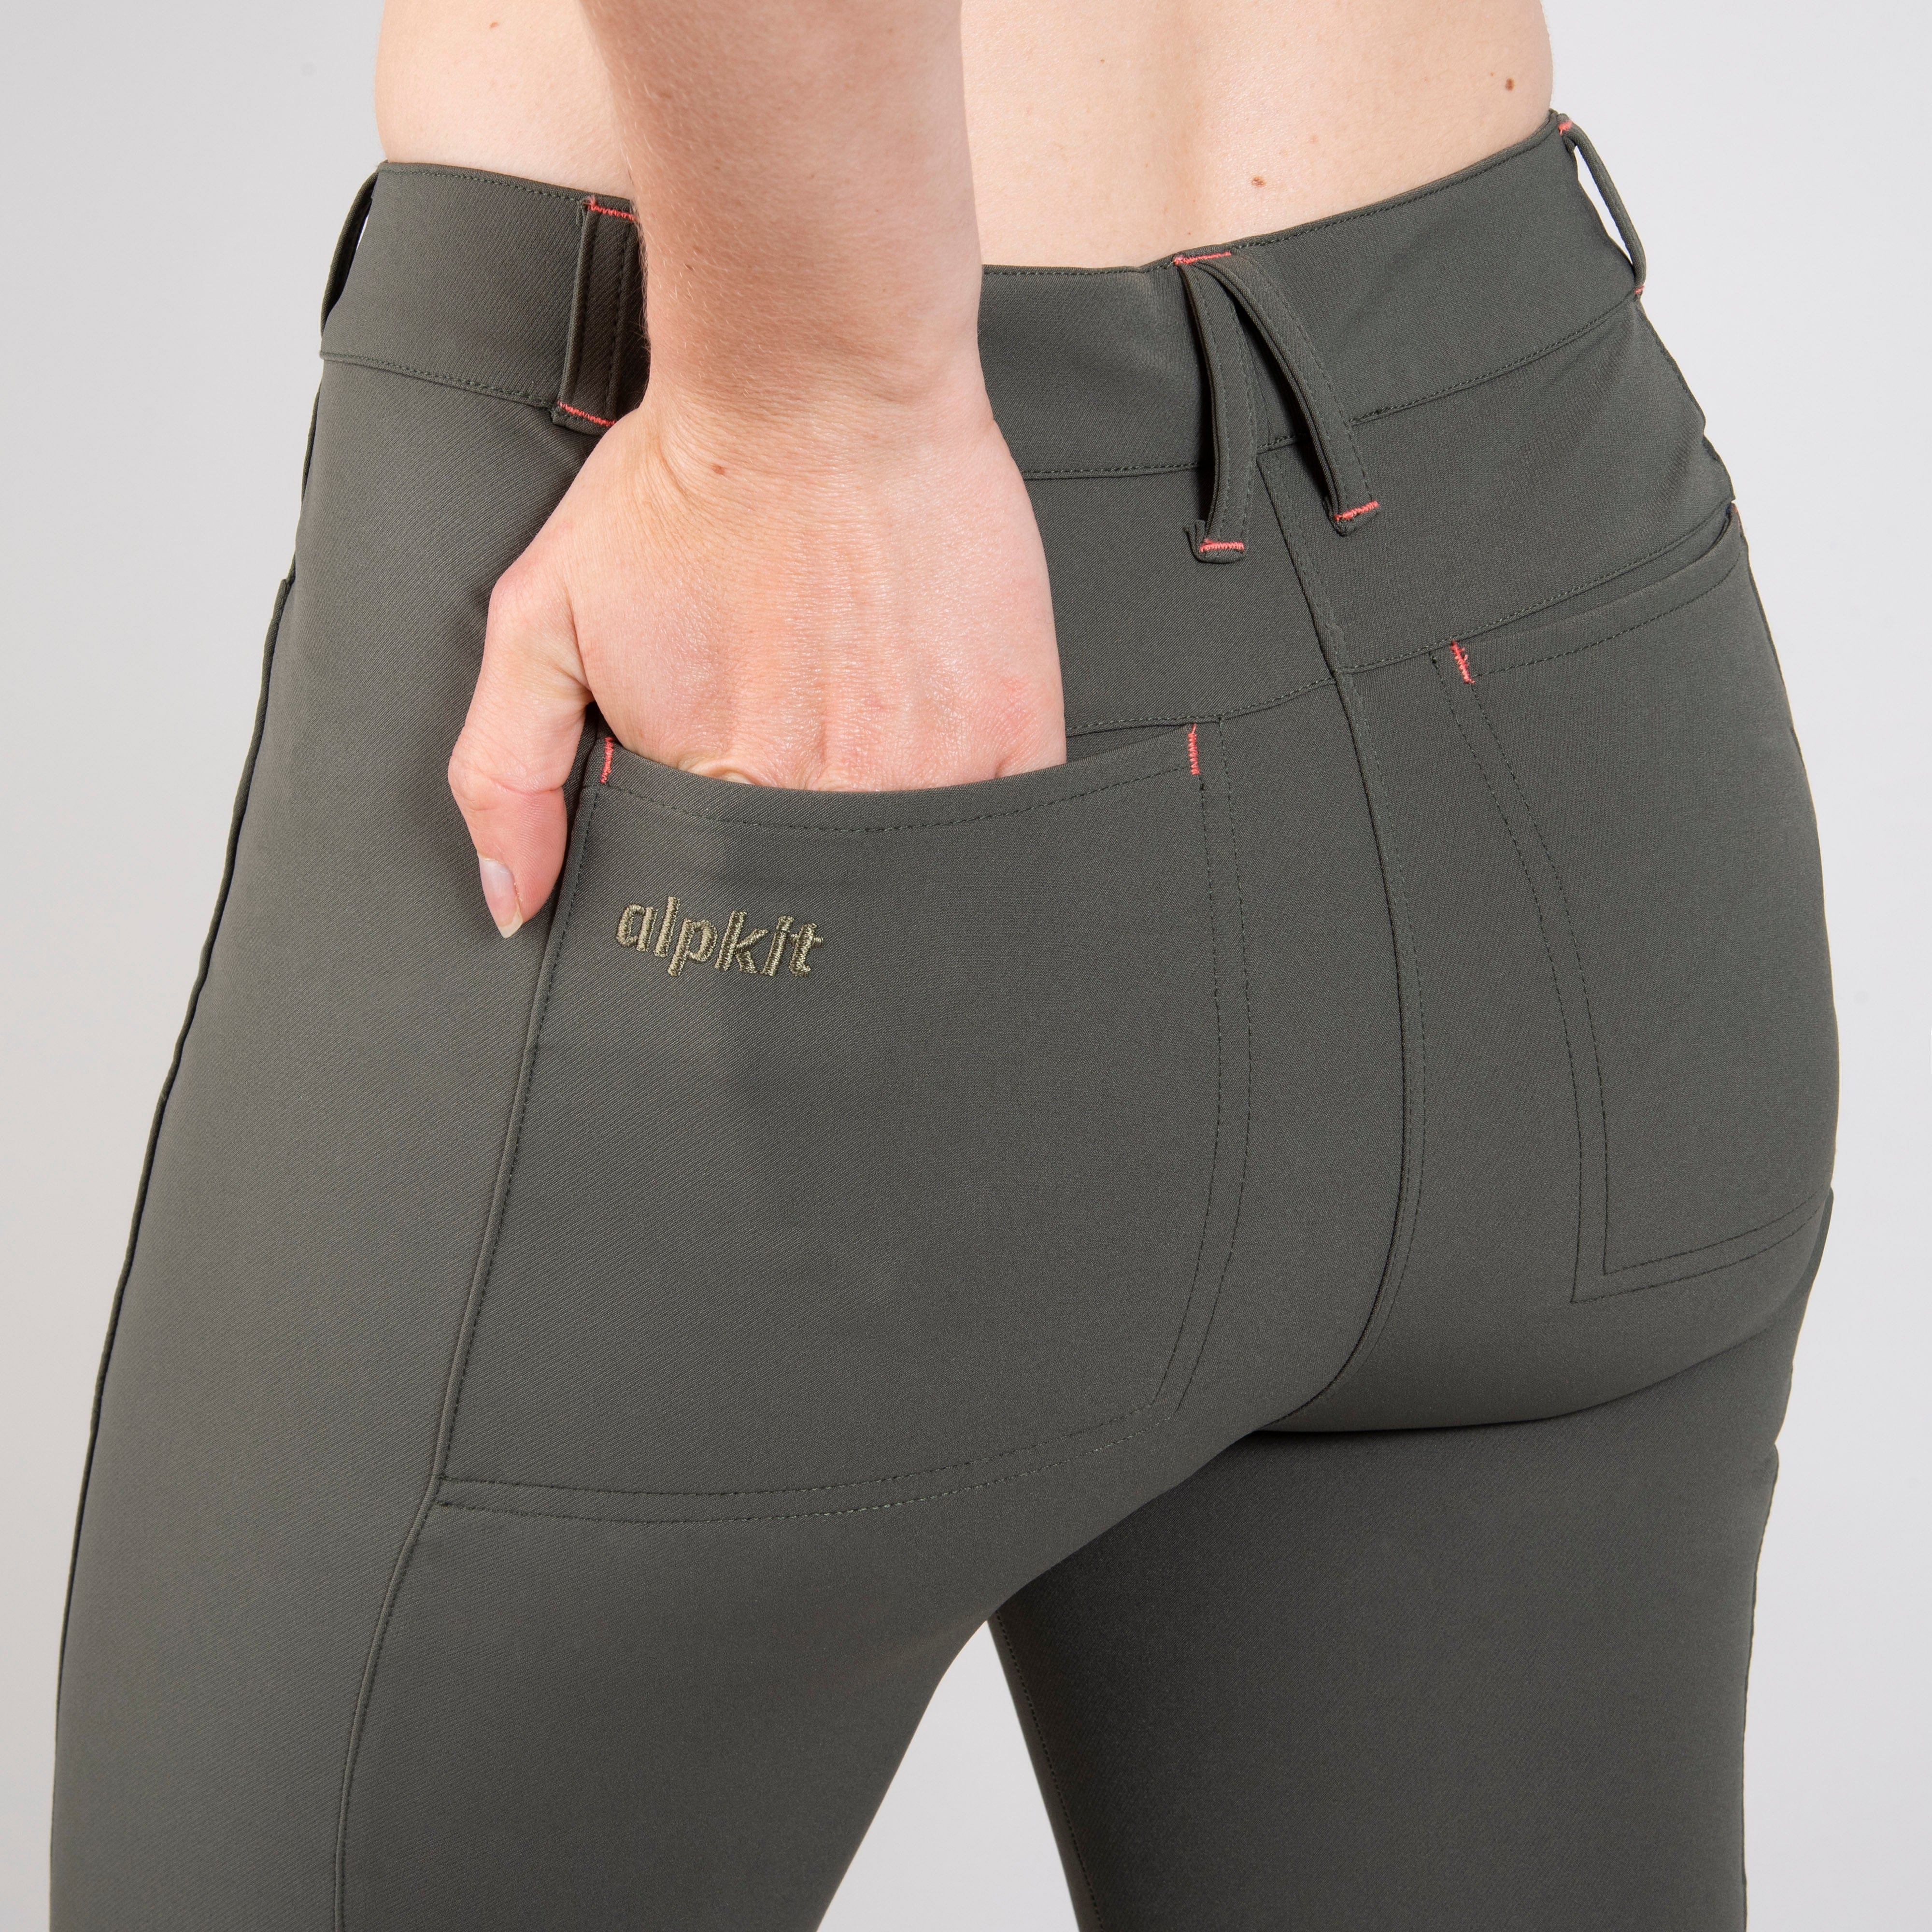 The Best Hiking Trousers For Women  Best Trekking Tights For Women